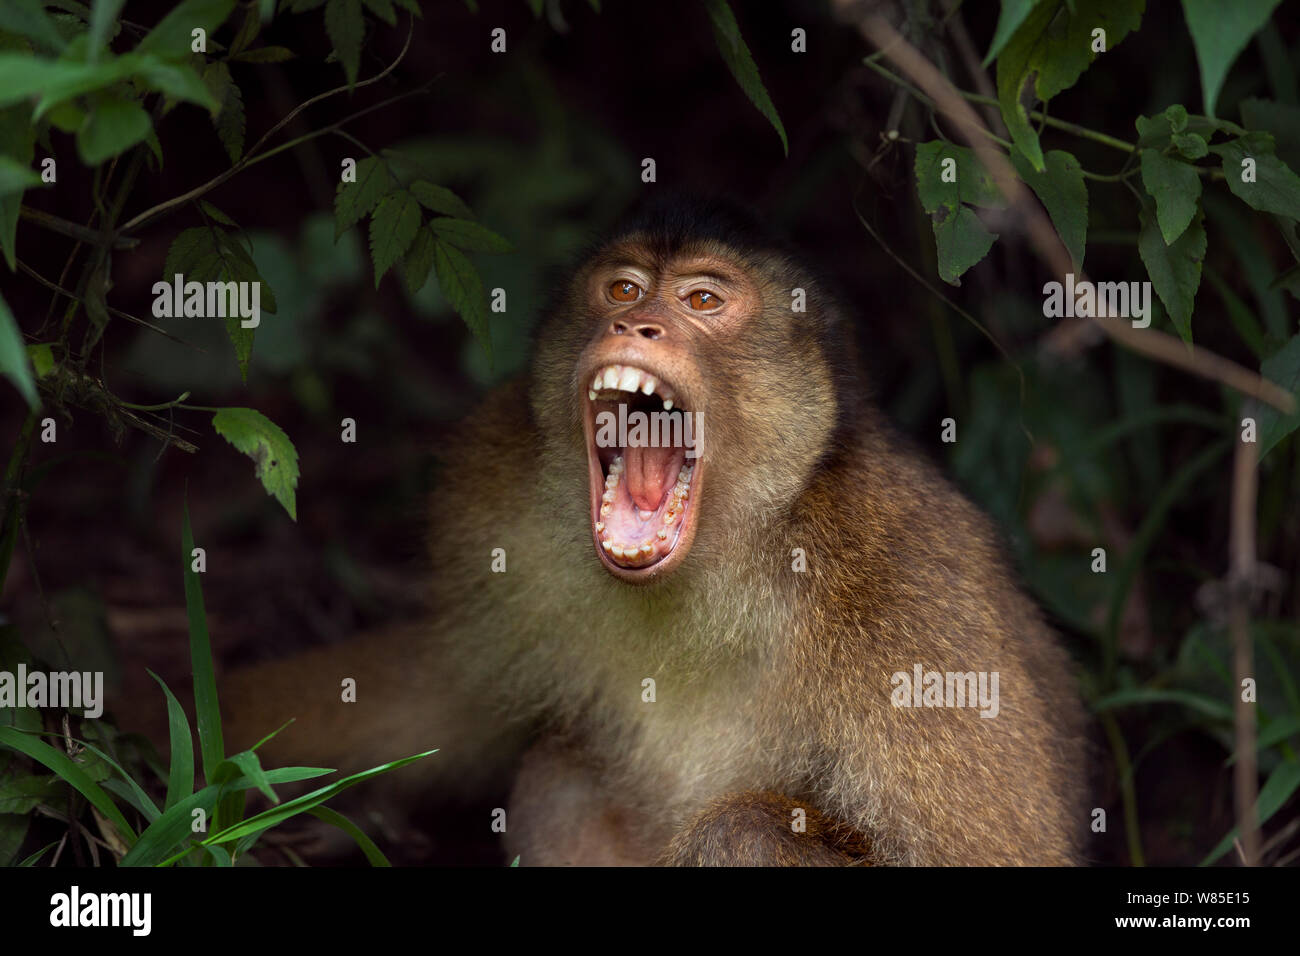 Southern or Sunda Pig-tailed macaque (Macaca nemestrina) young male yawning. Wild but used to being fed by local people. Gunung Leuser National Park, Sumatra, Indonesia. Stock Photo